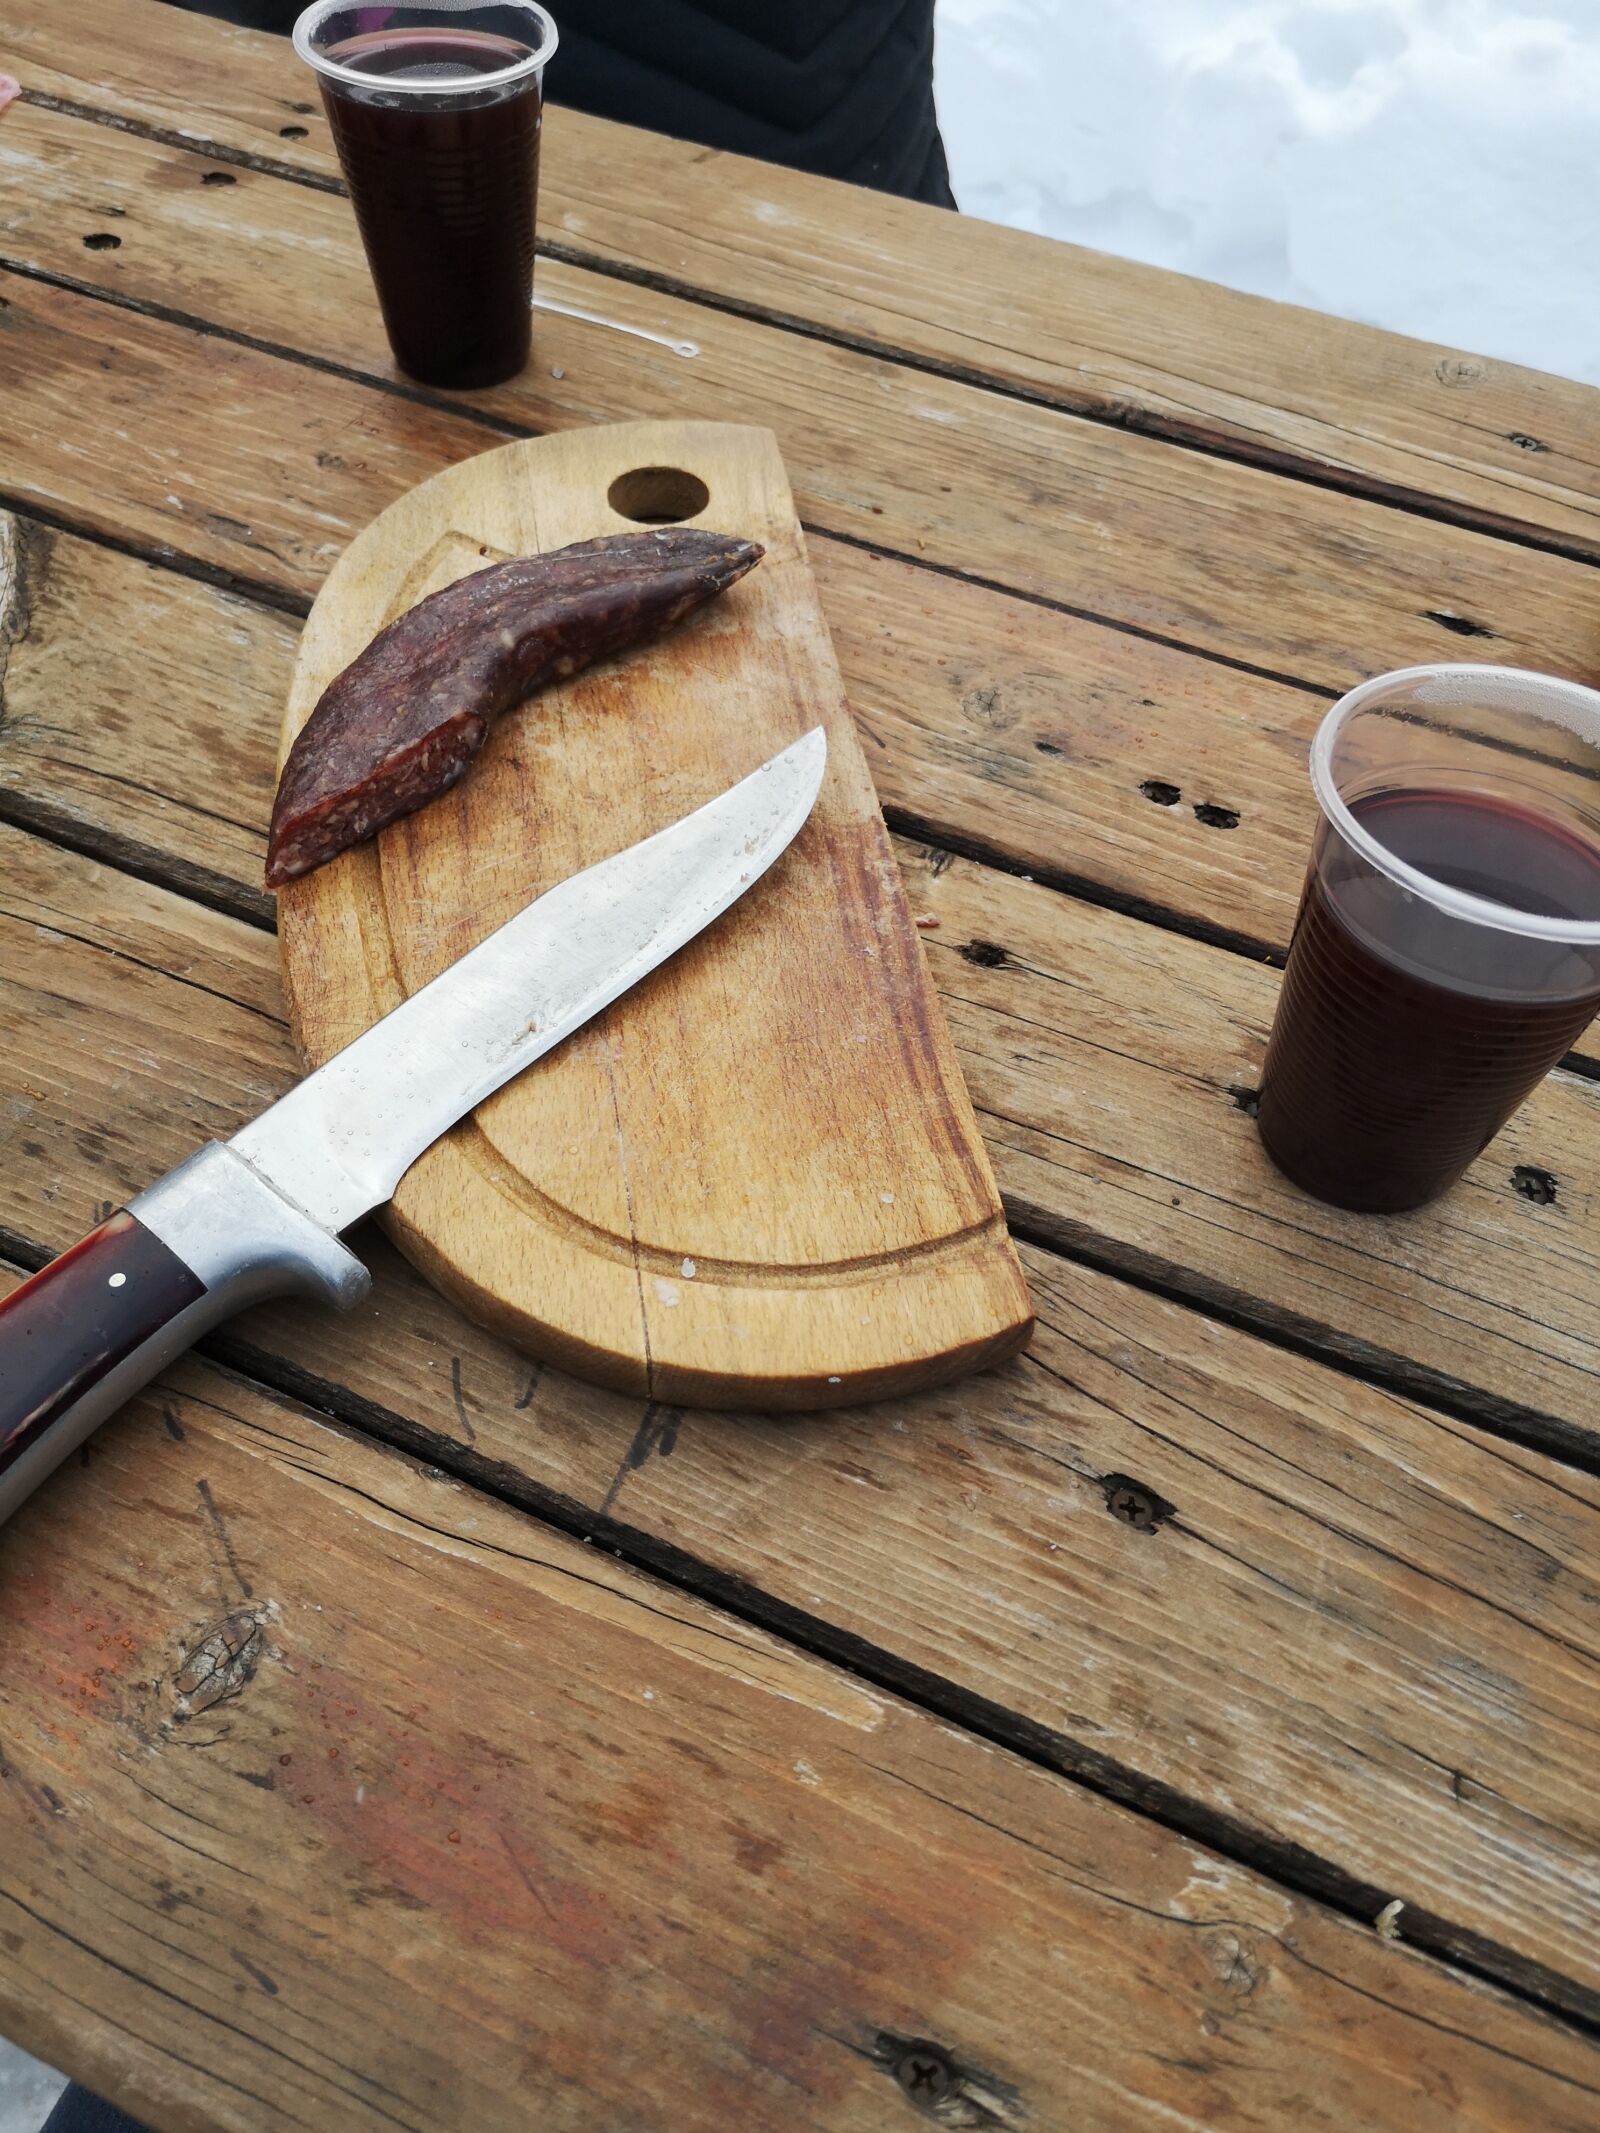 HUAWEI P20 sample photo. Meat, mulled wine, knife photography